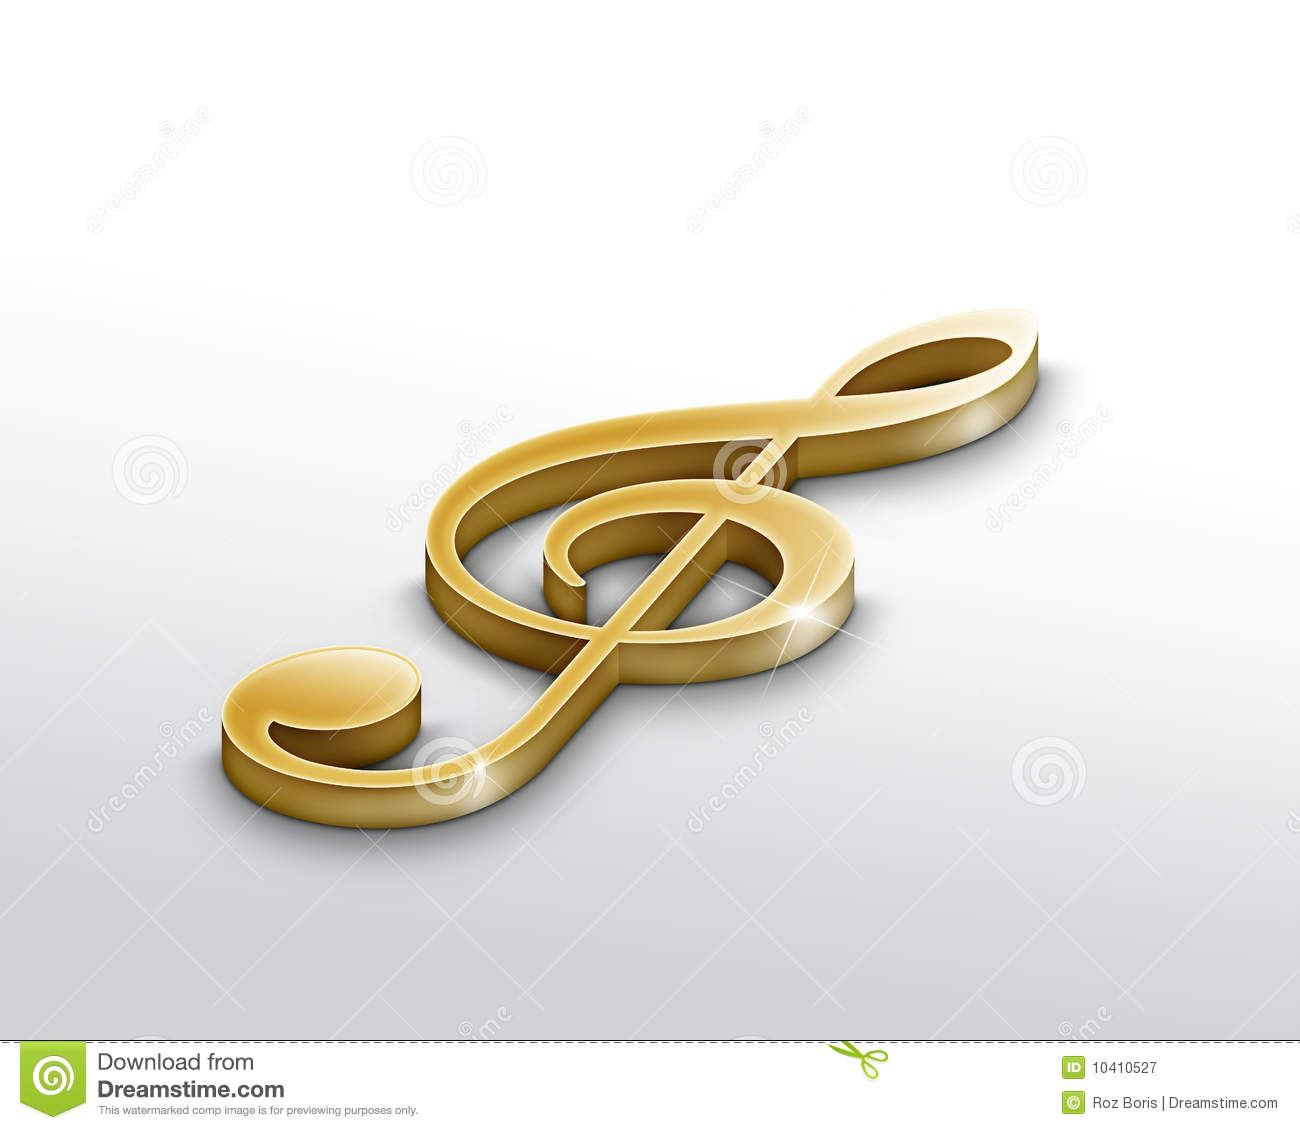 Gold Treble Clef Royalty Free Stock Photography   Image  10410527